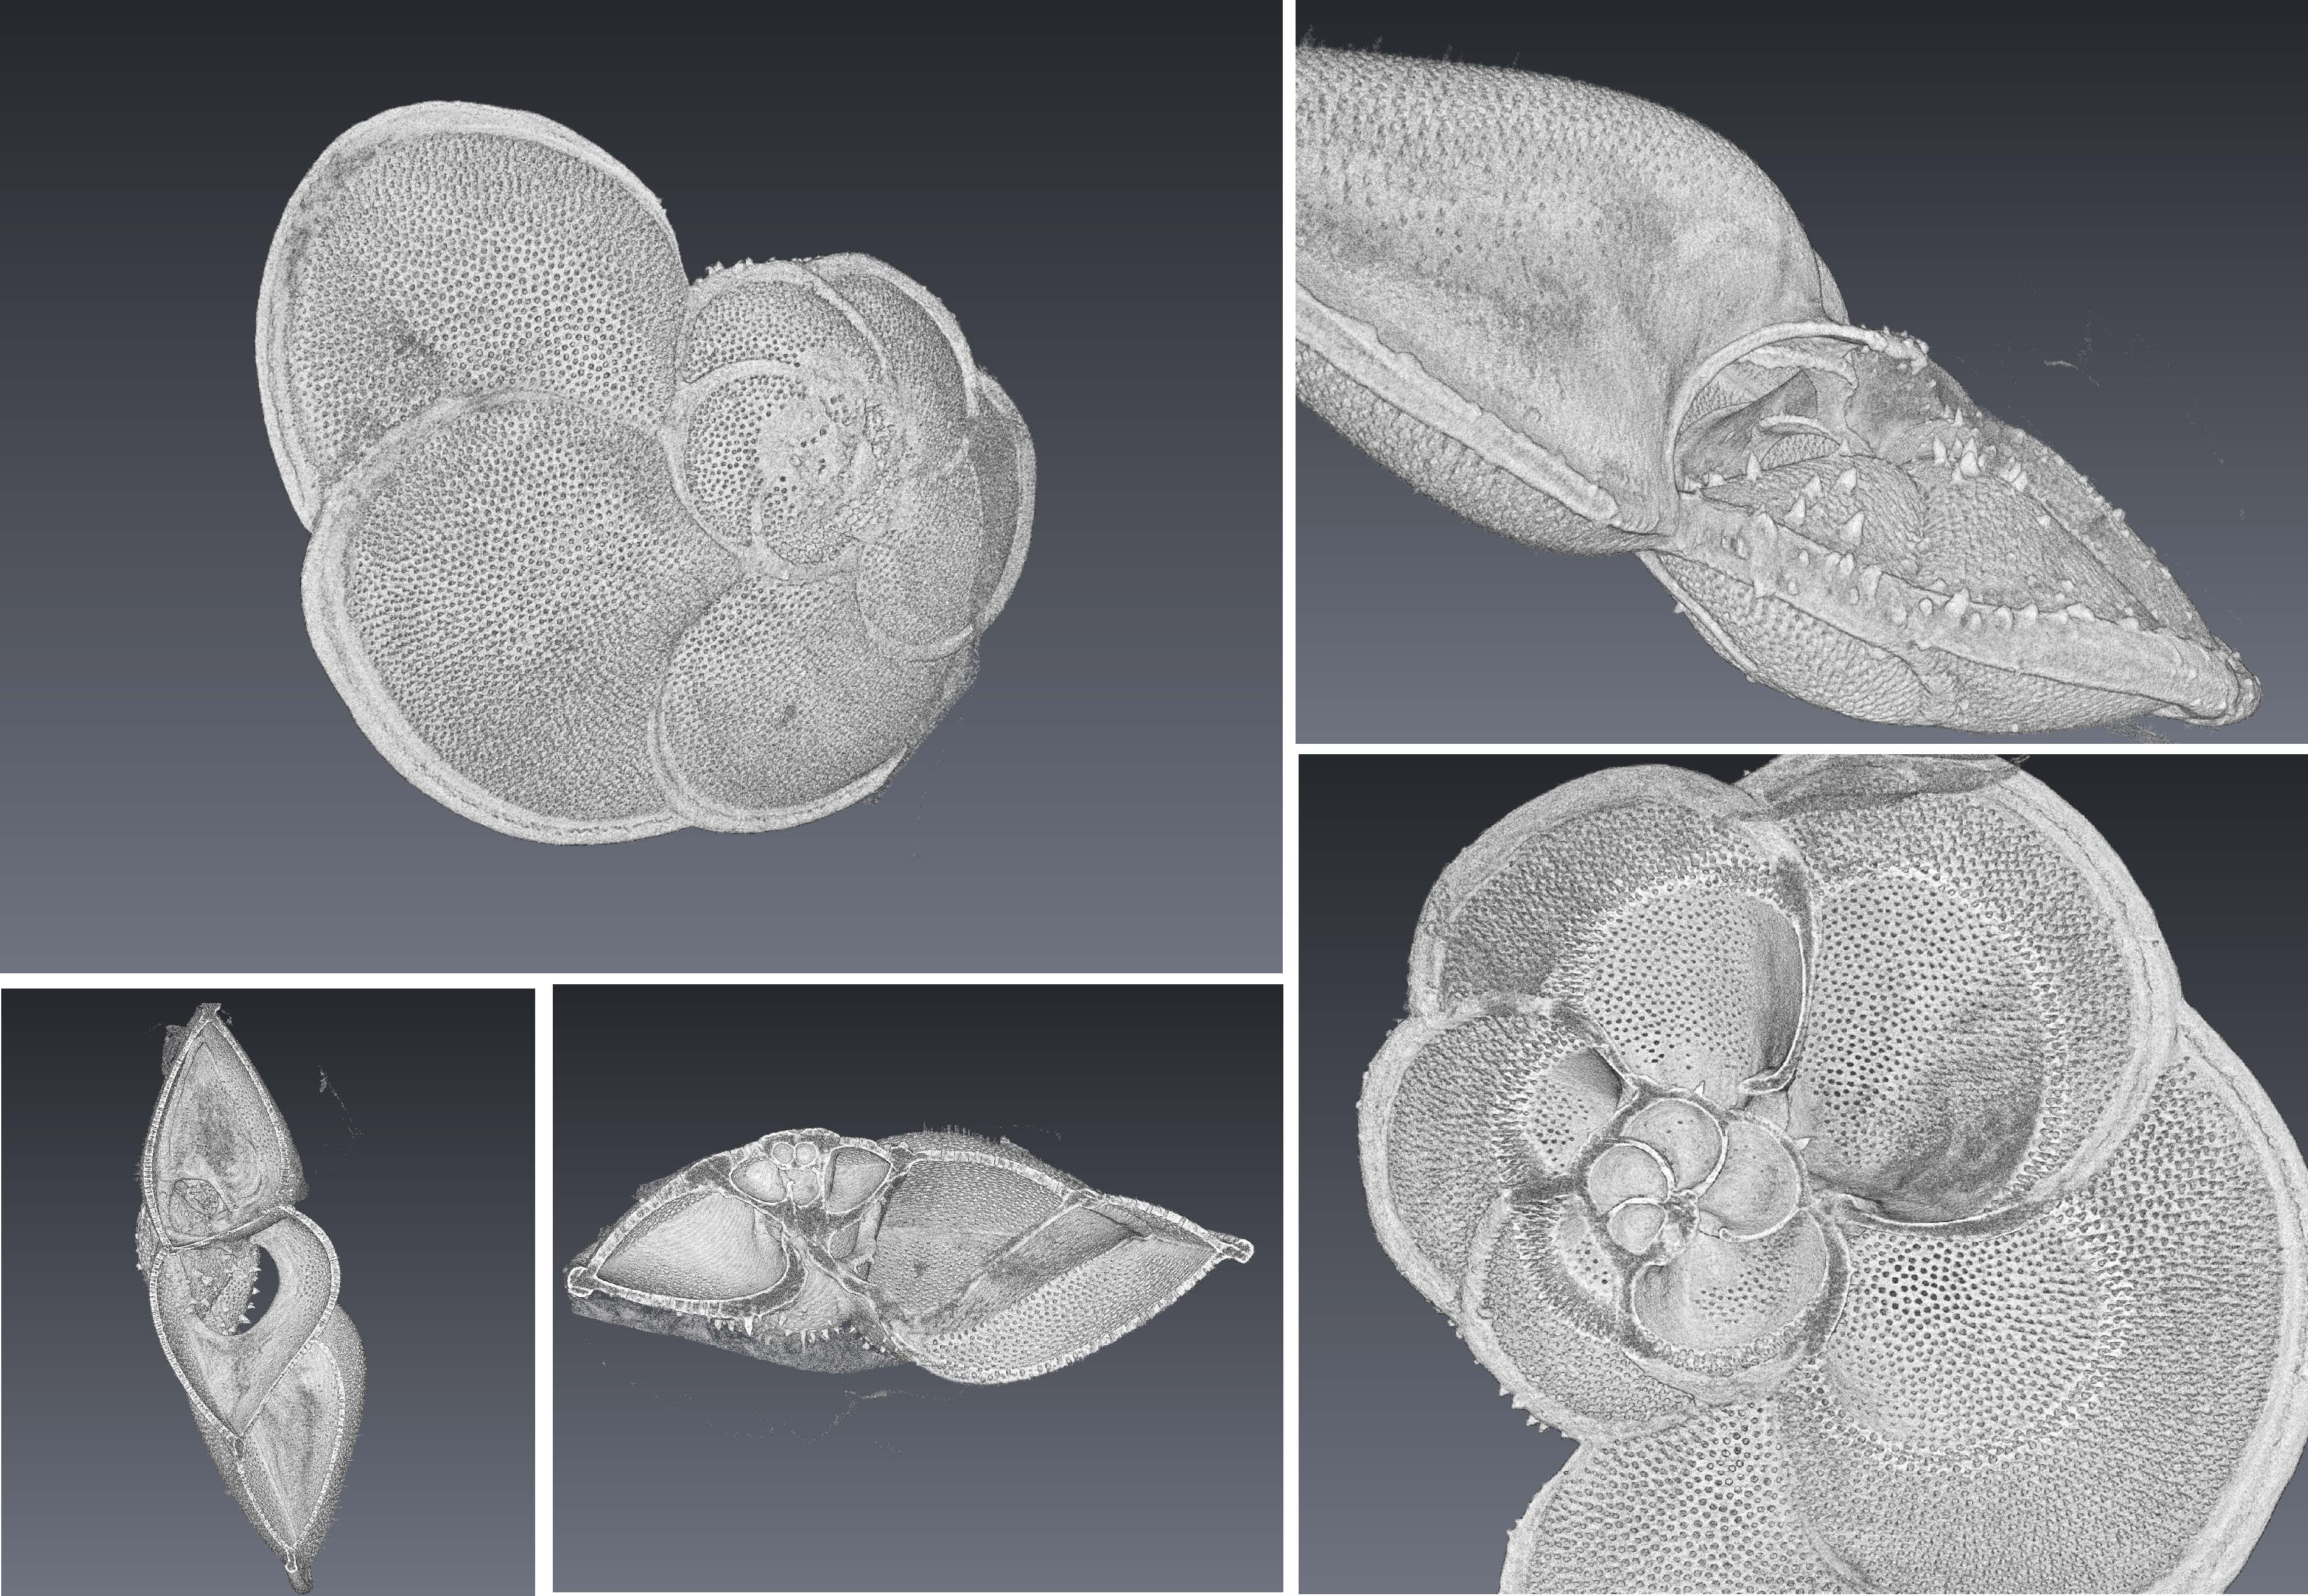 A collection of images showing the 3D reconstruction of the foraminifera Menardii